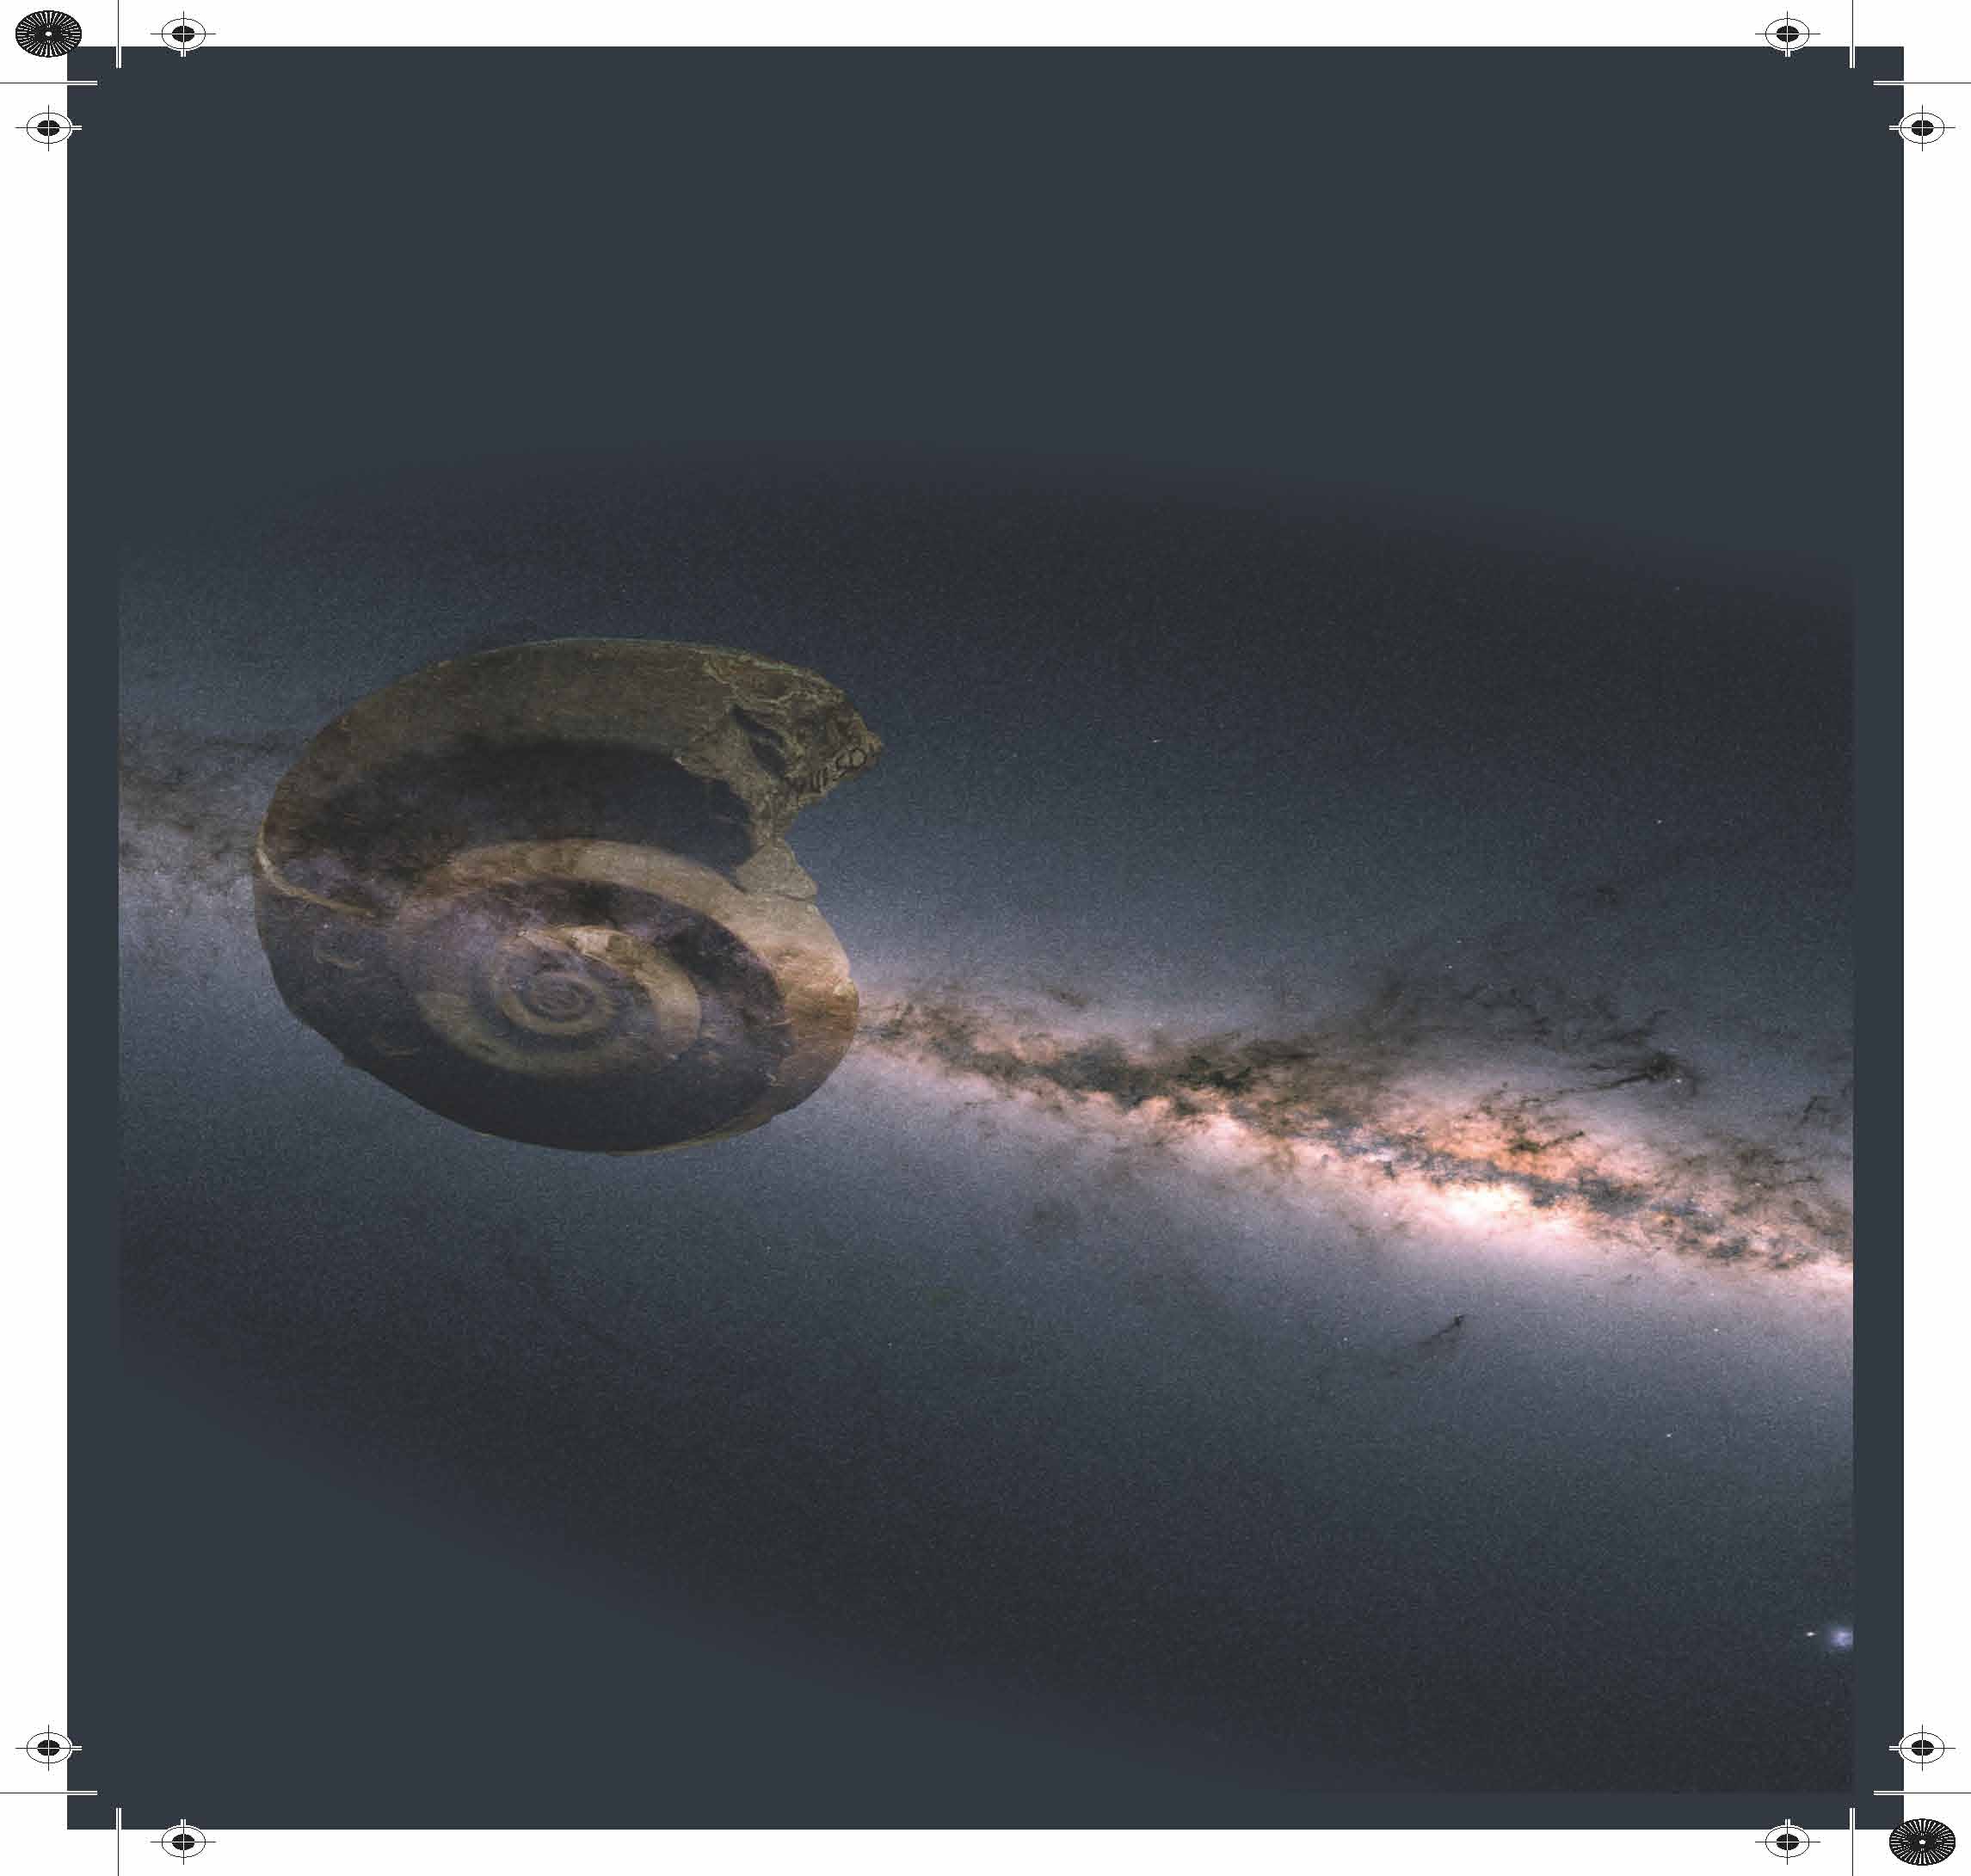 Artistic impression of the snail-like structure discovered by the team superimposed on a colour map of the Milky Way recently published by the Gaia collaboration (April 2018). The snail shell appears when combining the position and velocities of stars near the Sun. Its characteristics depend on what caused it and hence it can be used to do galactic archeology: we can trace the origin of the snail shell to an encounter the Milky Way experienced in the recent past. (c): Surinye Olarte, ICCUB. Gaia sky in colours: ESA/Gaia/DPAC, A.Moitinho / A. F. Silva / M. Barros / C. Barata, University of Lisbon, Portugal; H. Savietto, Fork Research, Portugal.